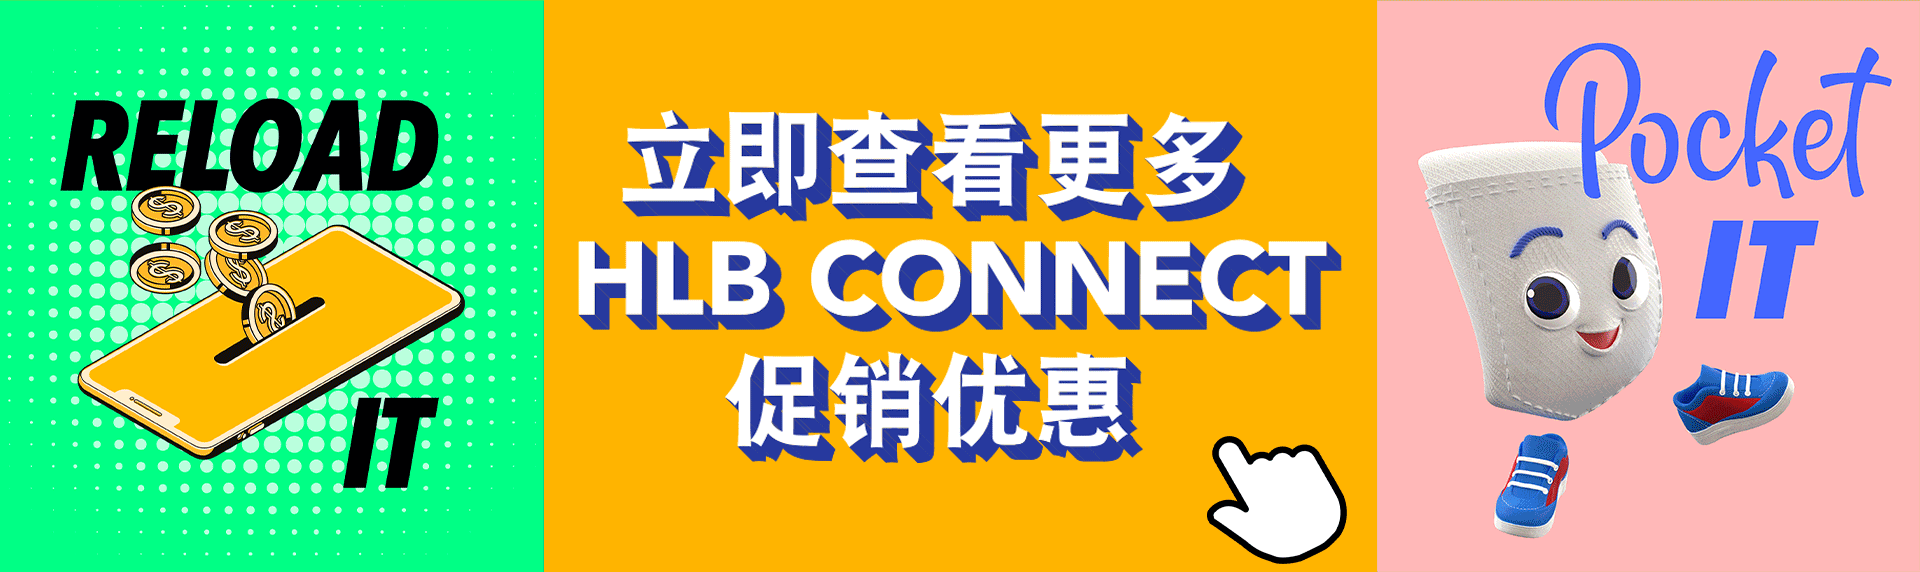 Check out all HLB connect promotions here